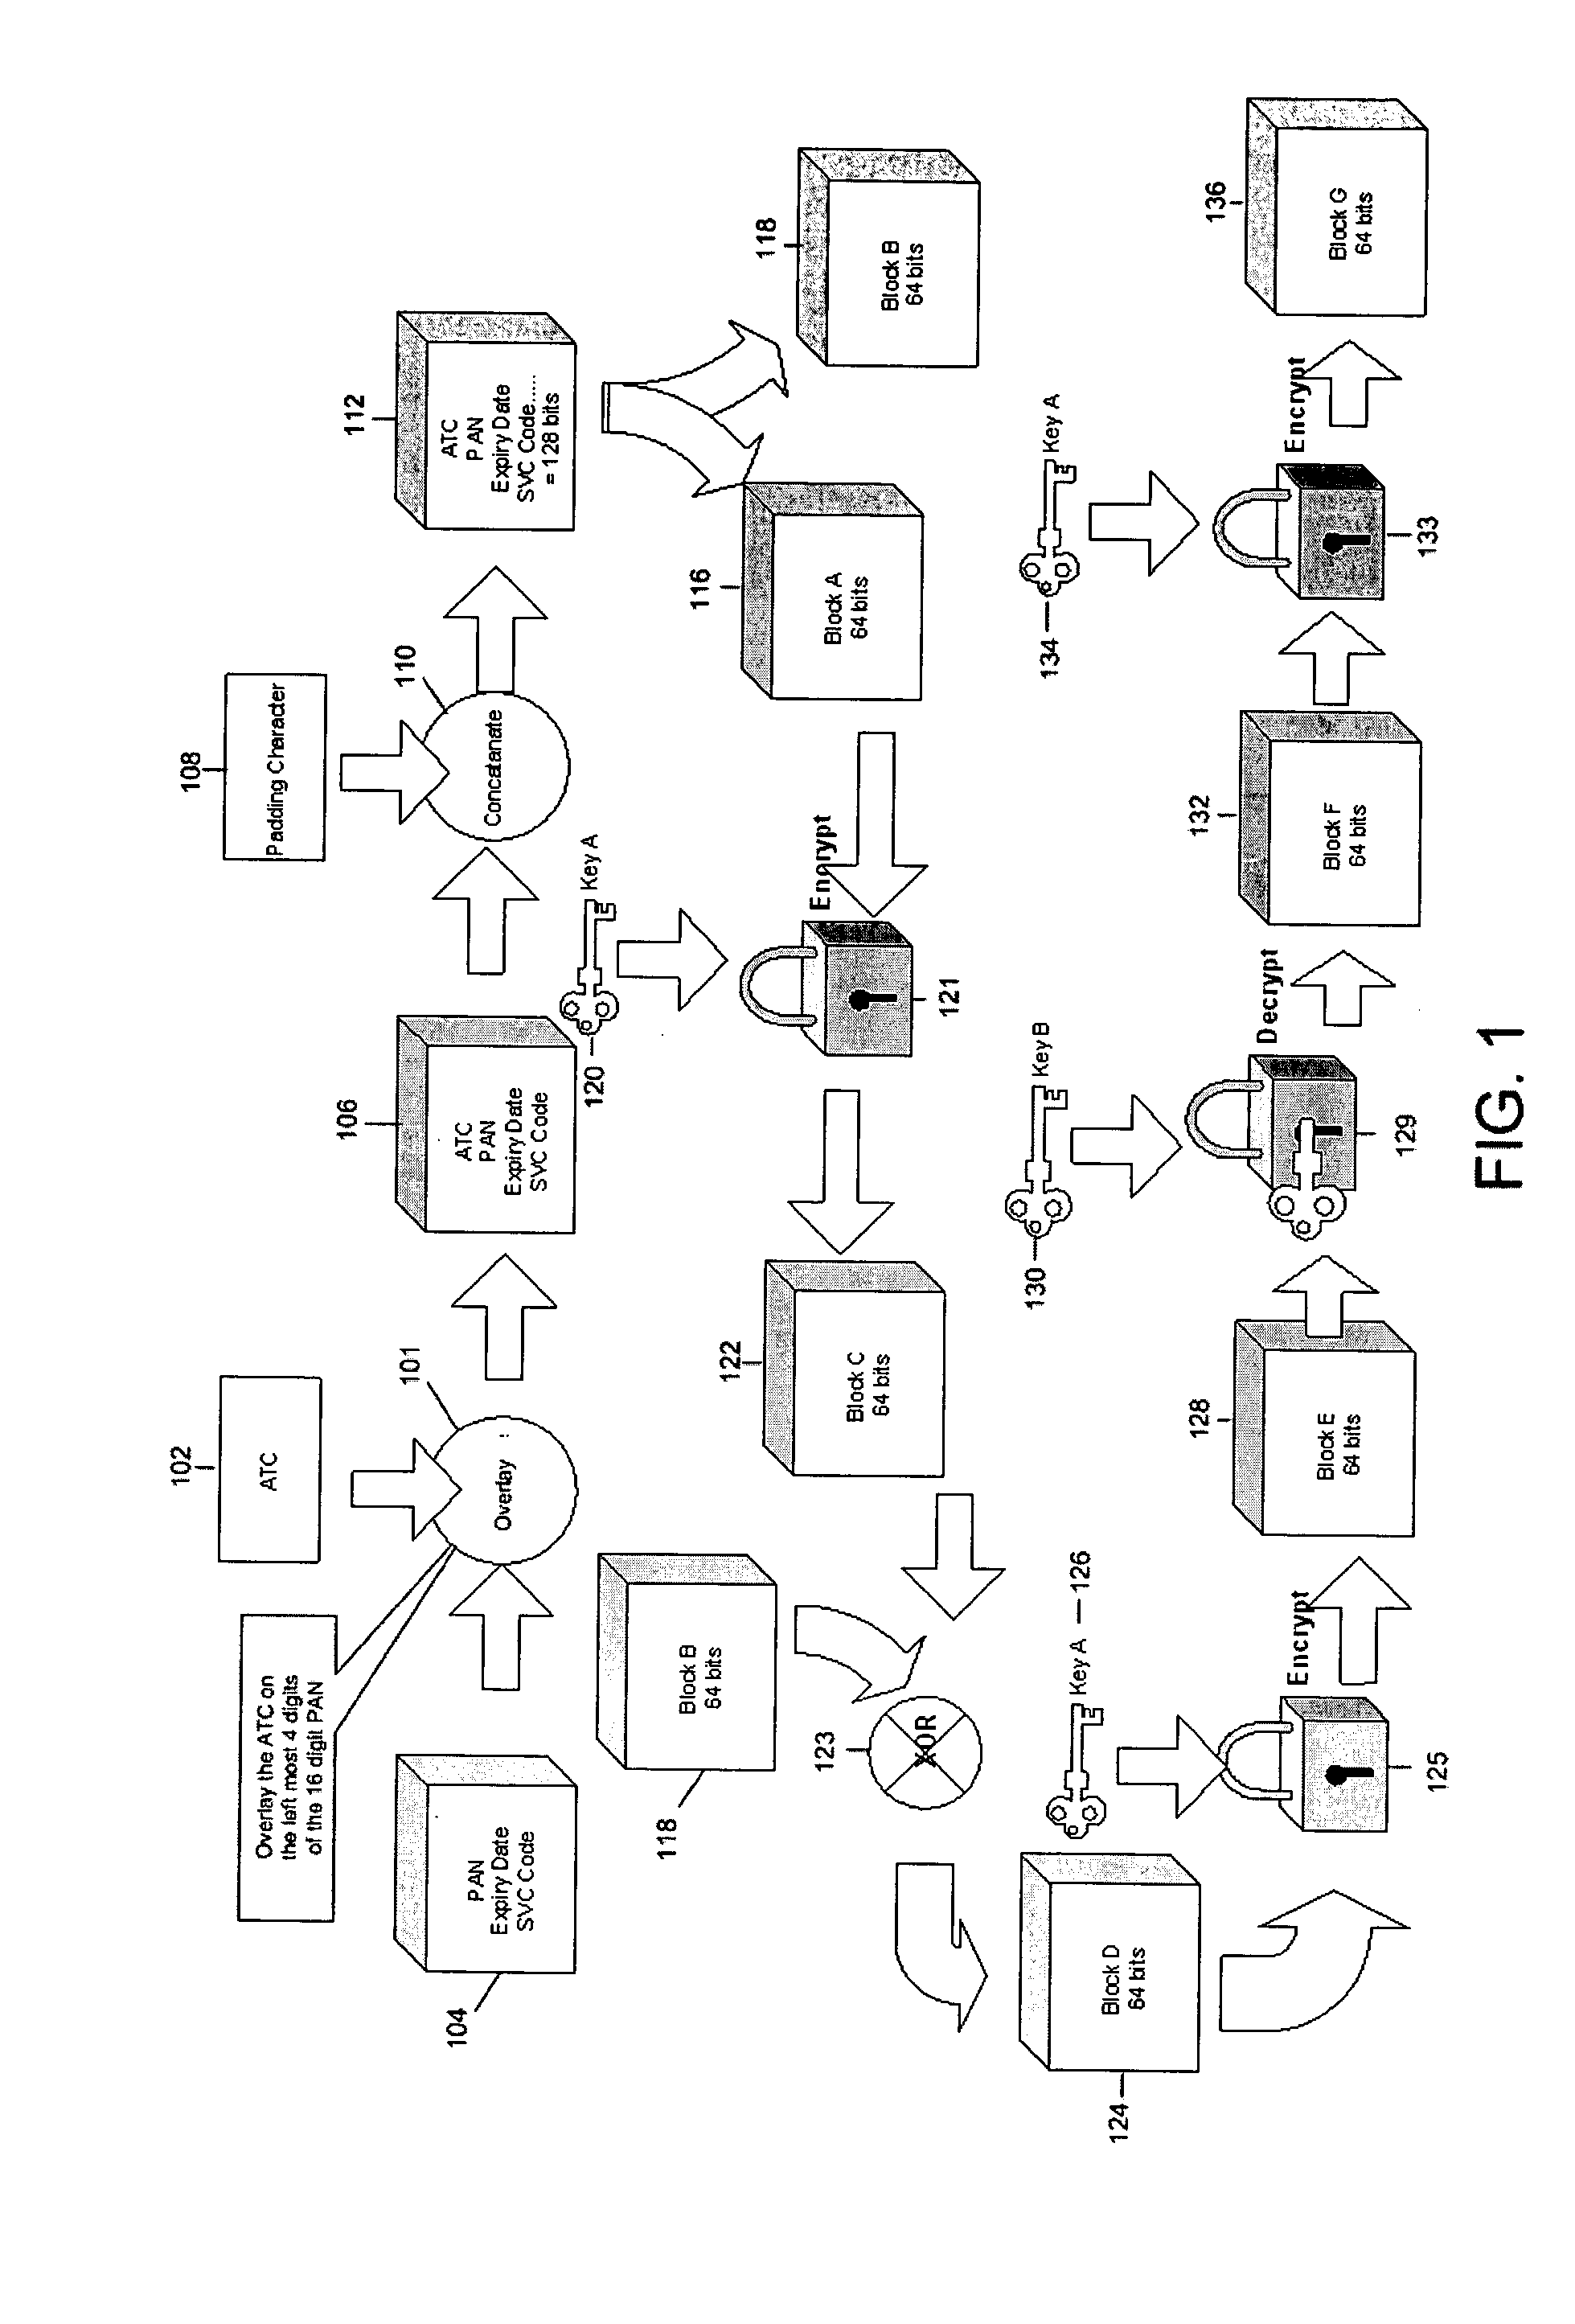 Method and system for generating a dynamic verification value